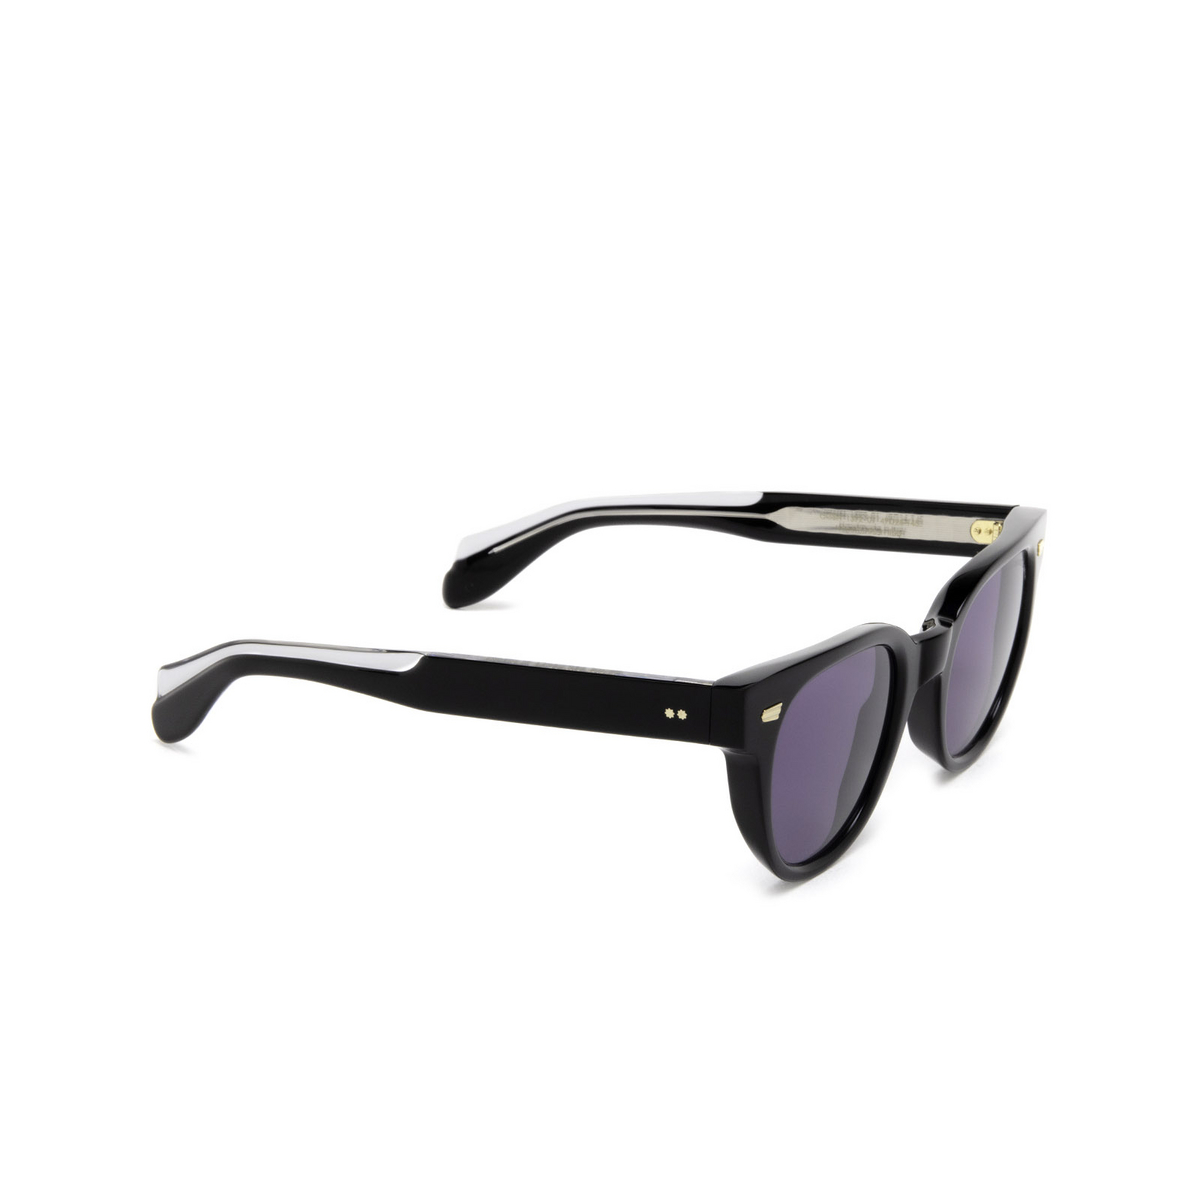 Cutler and Gross® Round Sunglasses: 1392 SUN color Black 01 - three-quarters view.